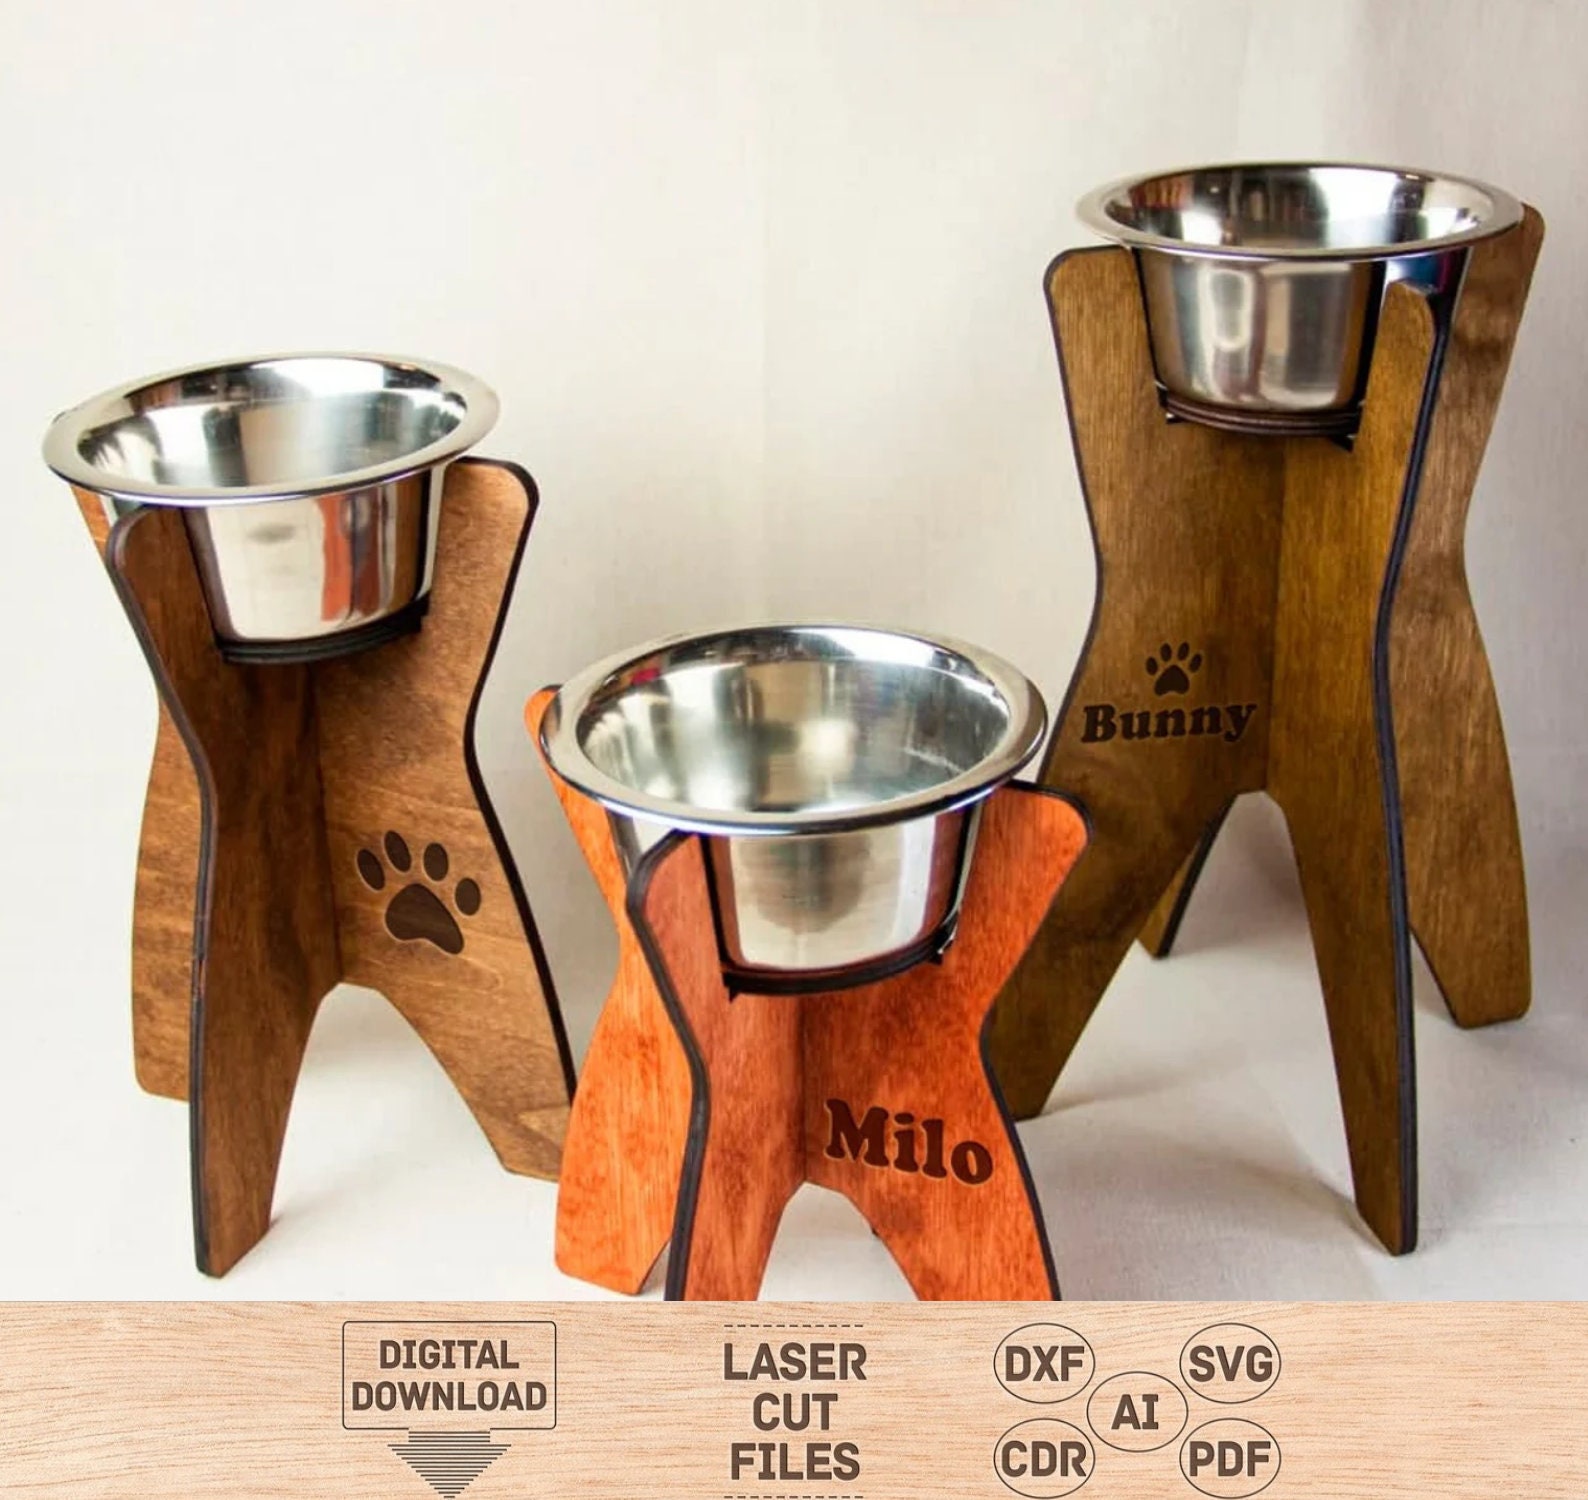 Personalized Elevated Dog Bowl Stand with Internal Storage - Blue –  GrooveThis Woodshop